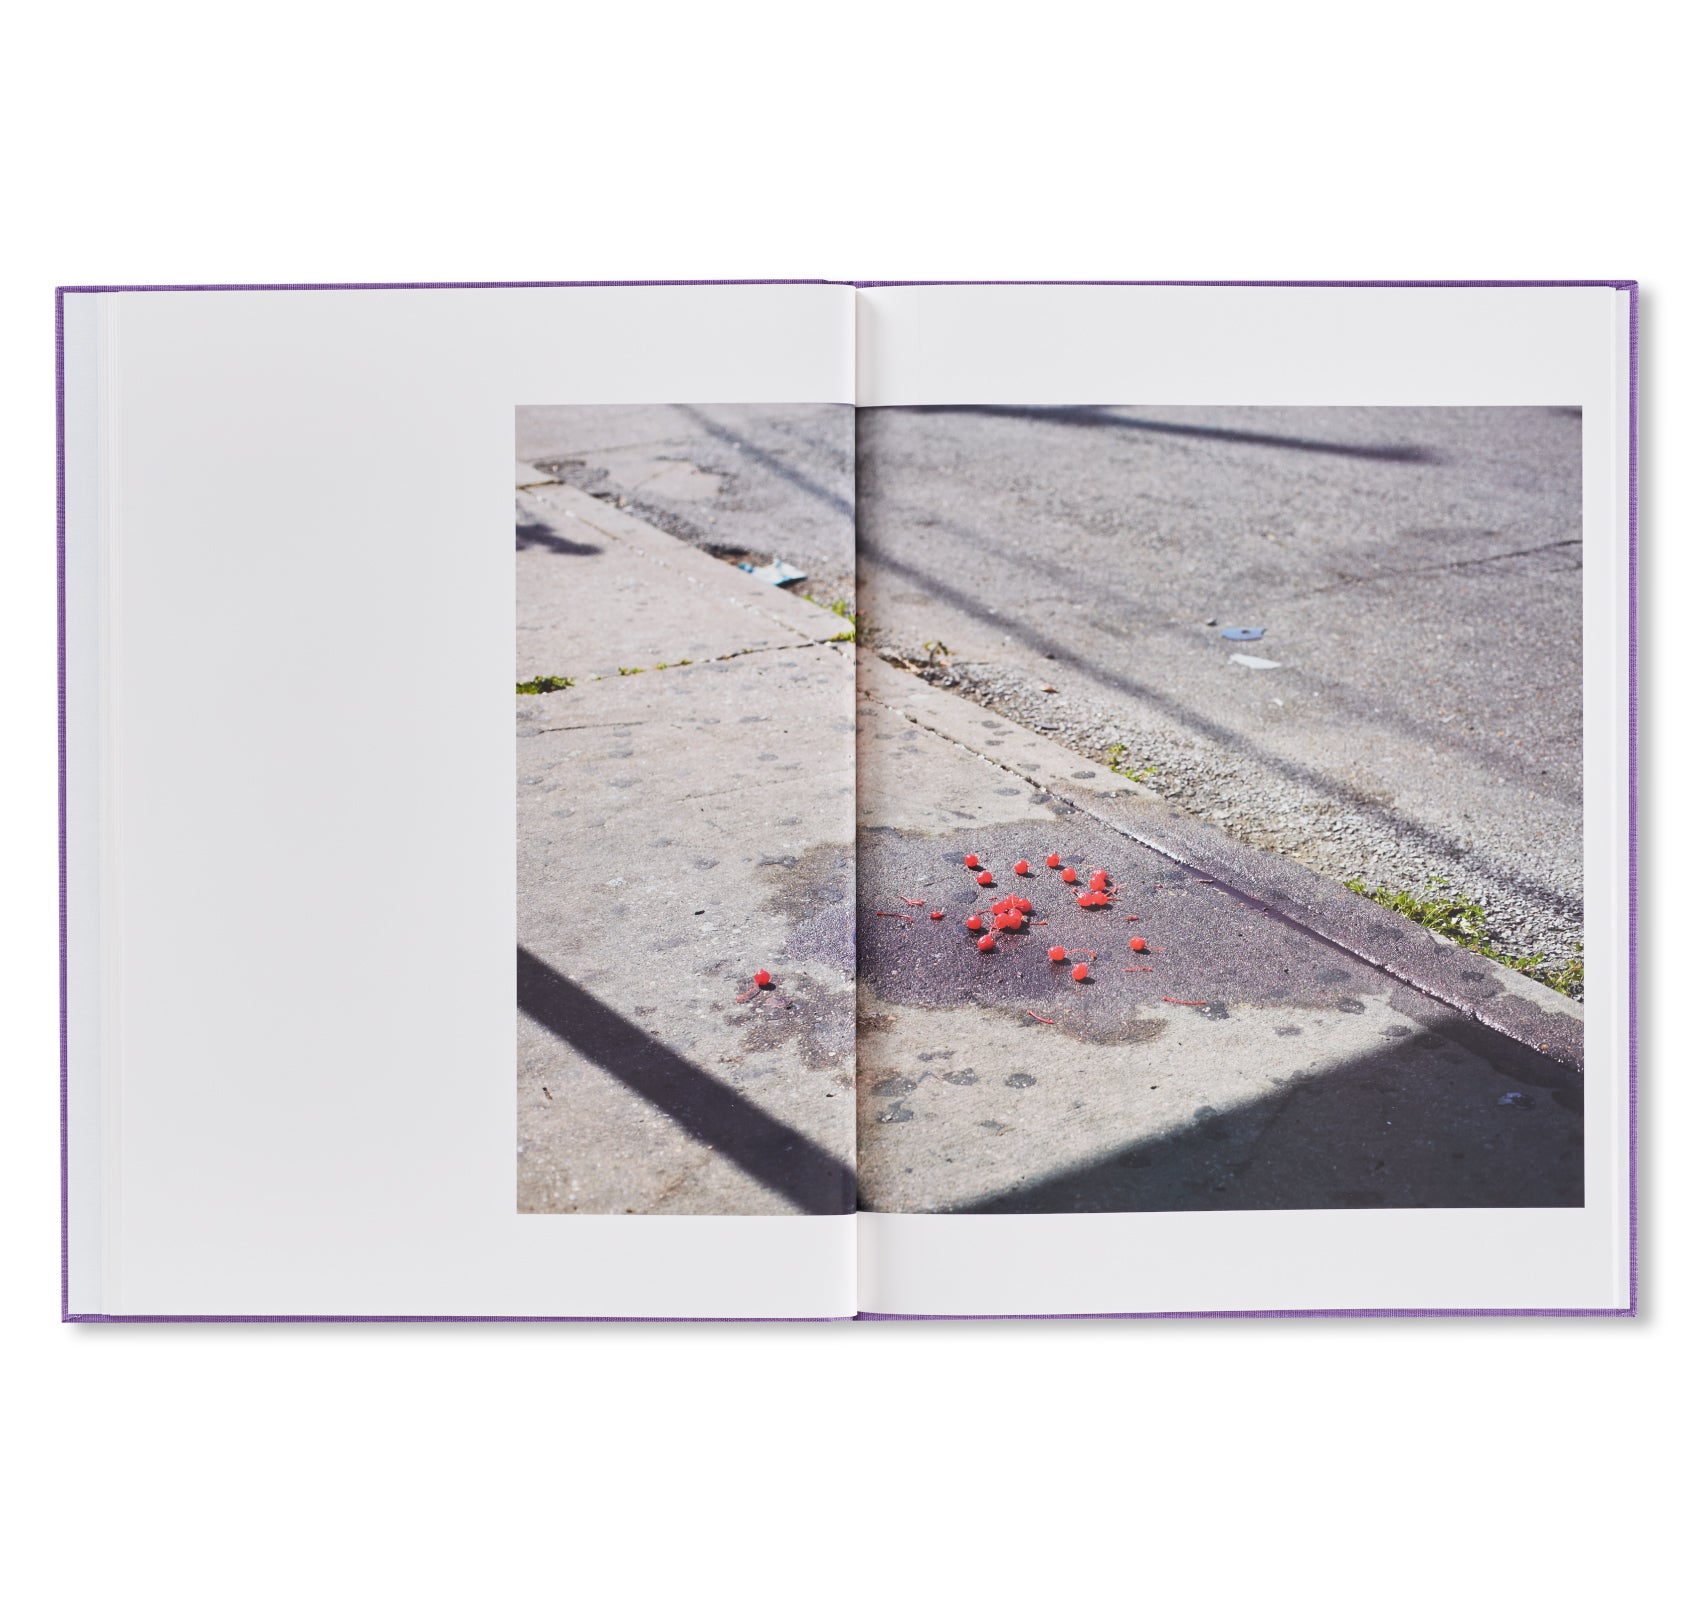 A SHIMMER OF POSSIBILITY by Paul Graham [SIGNED]